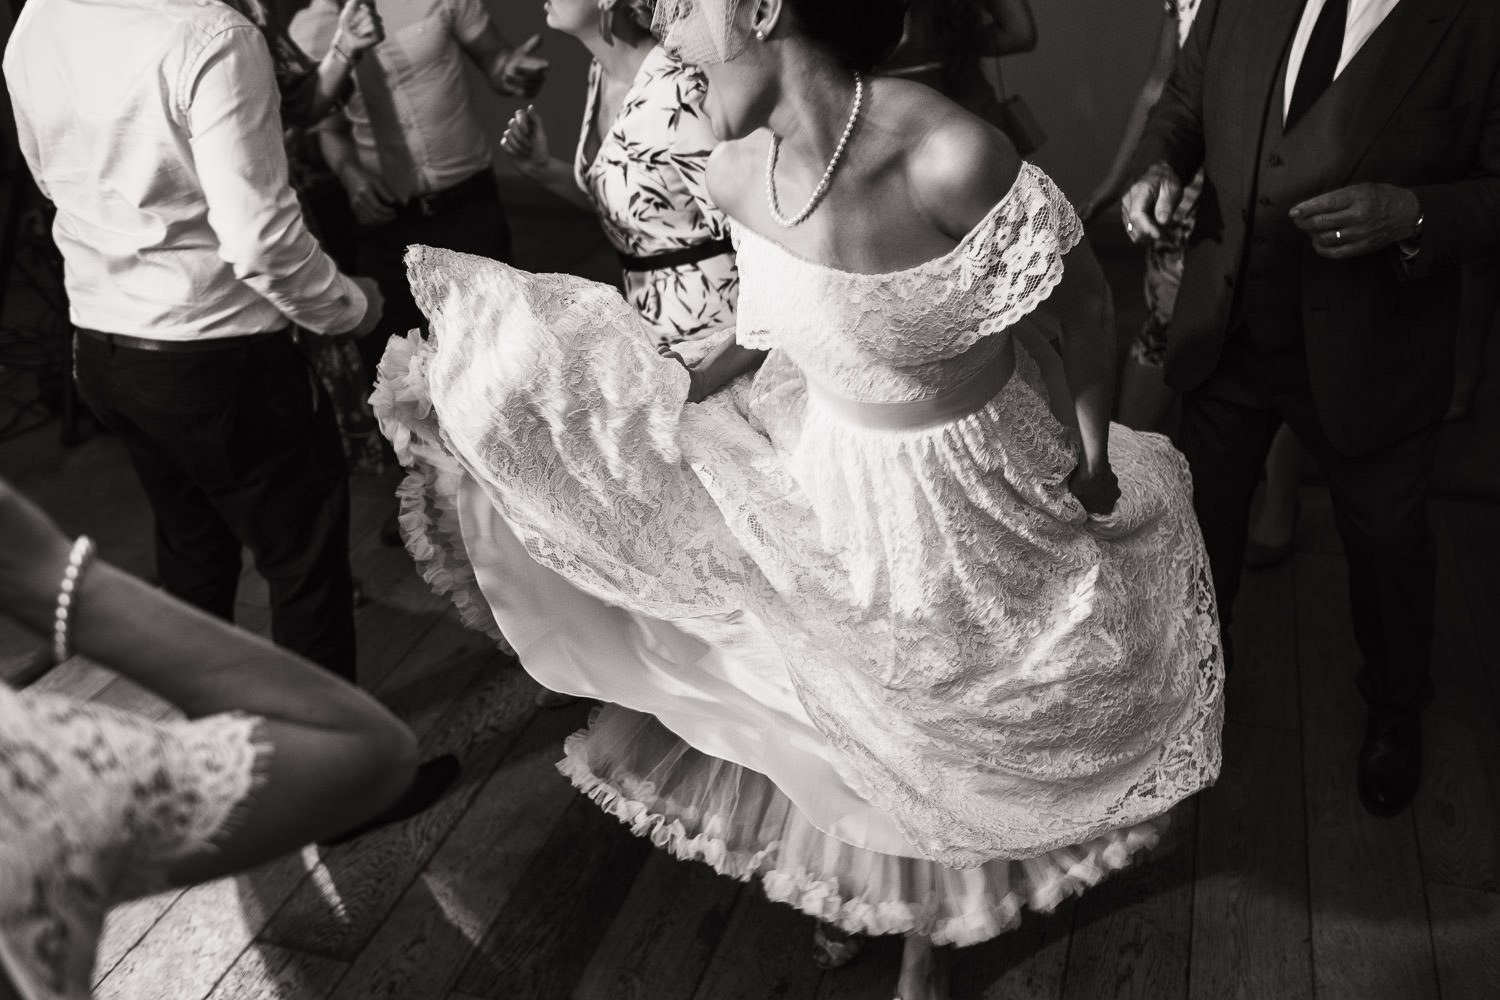 The bride dressed in a vintage style off the shoulder lace dress is dancing. She is holding her dress and singing.